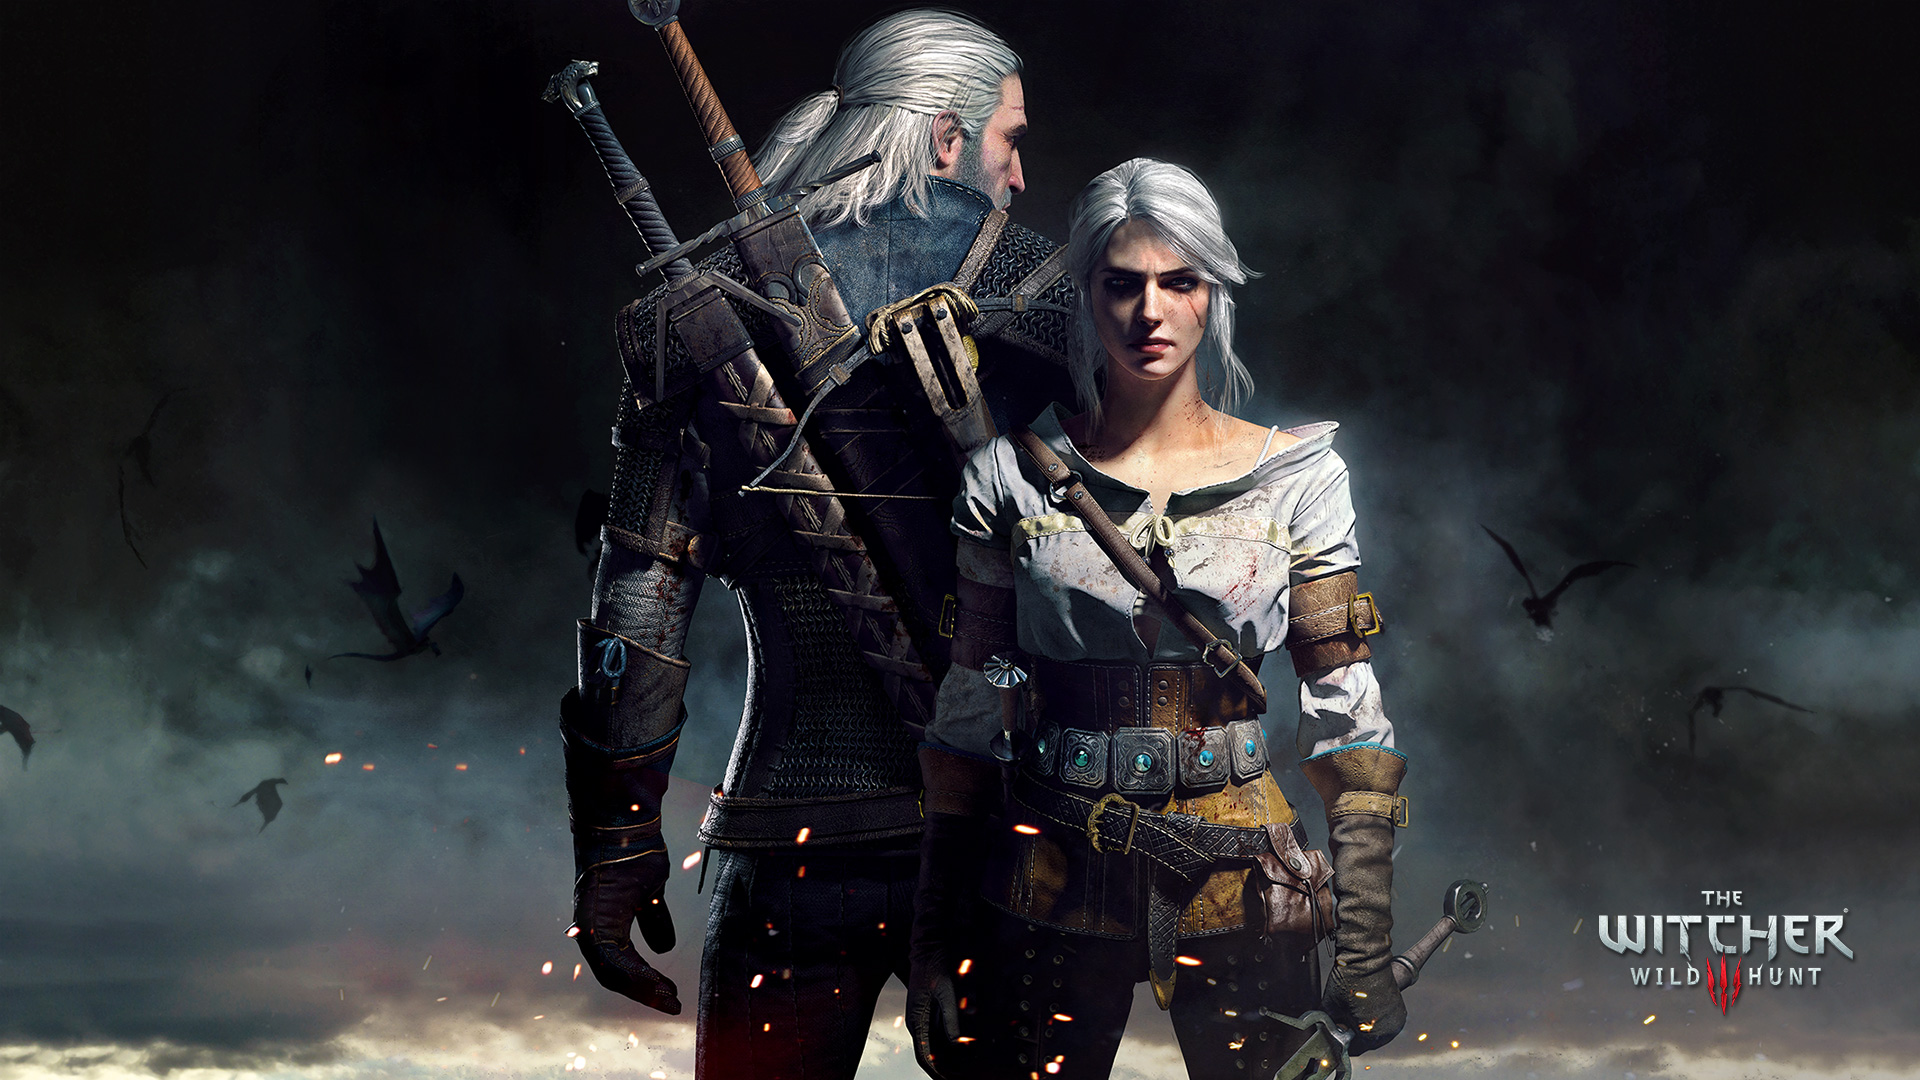 The Witcher 3 | Single-player PC Role-Playing Game